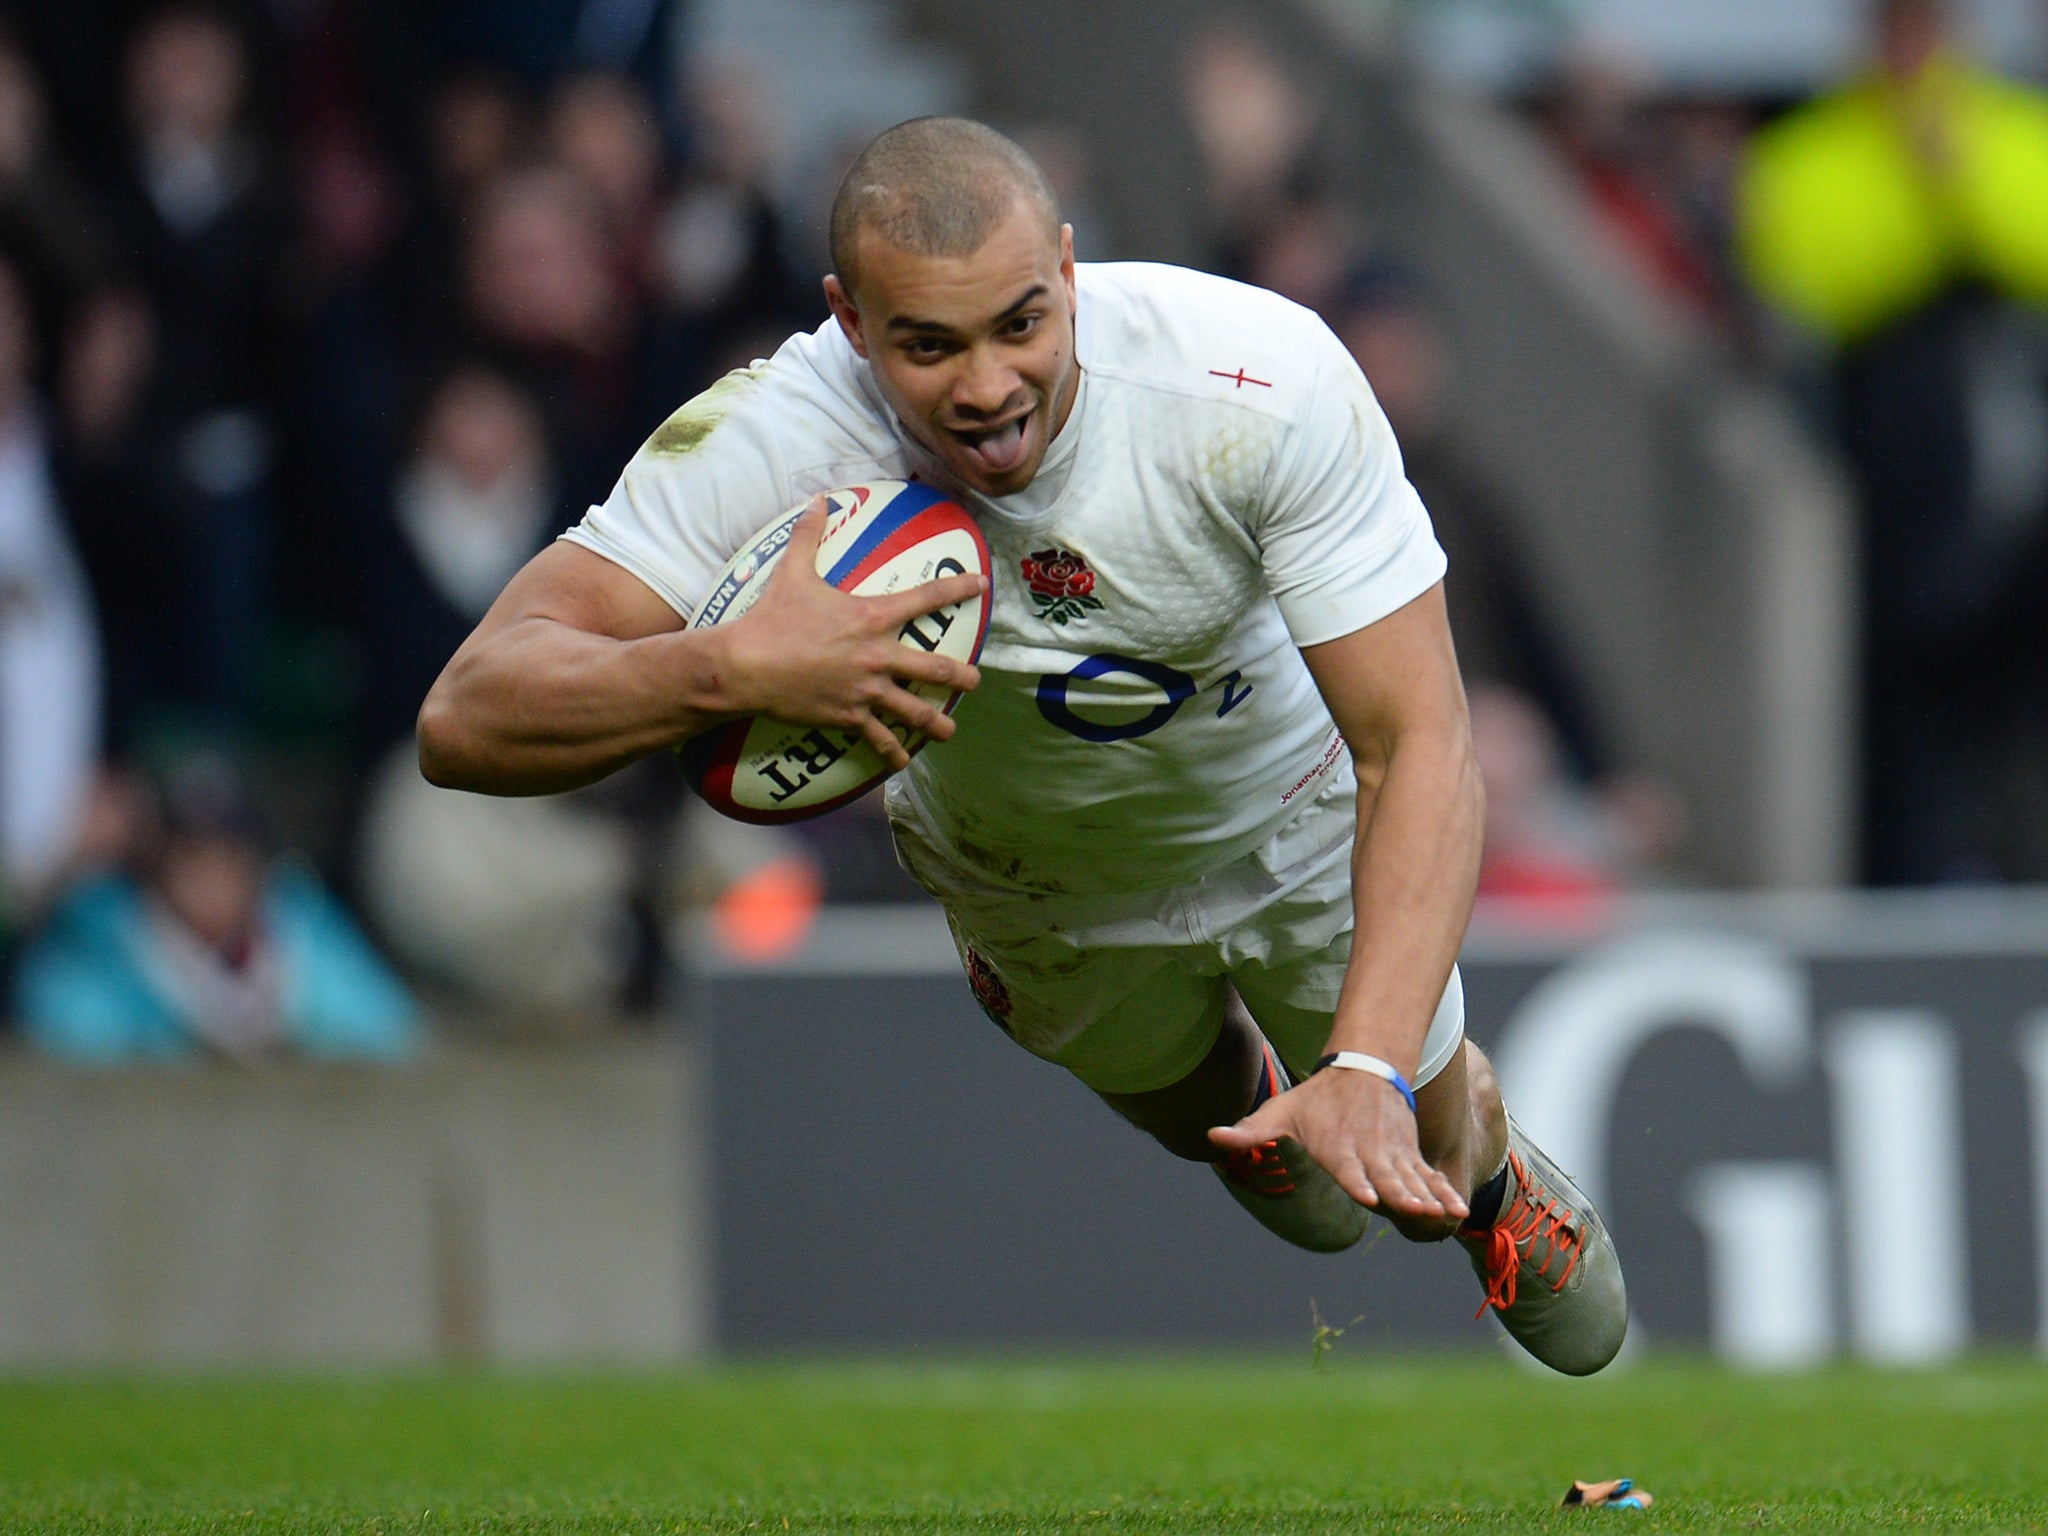 Jonathan Joseph has been the most eye-catching performer over the first two rounds of Six Nations